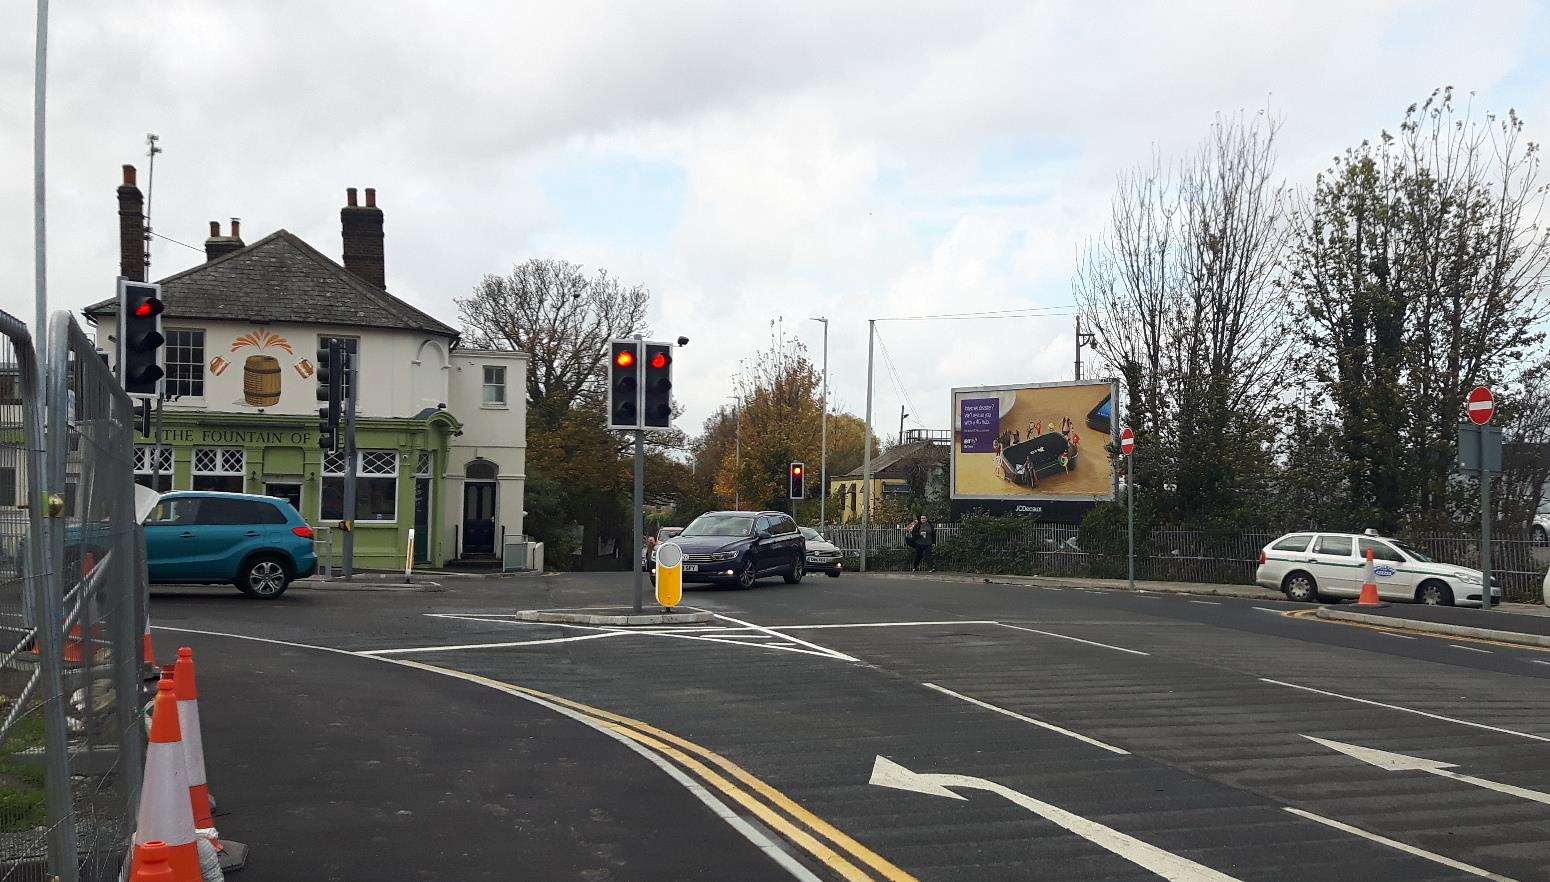 The new road layout outside the station looking towards the Fountain of Ale